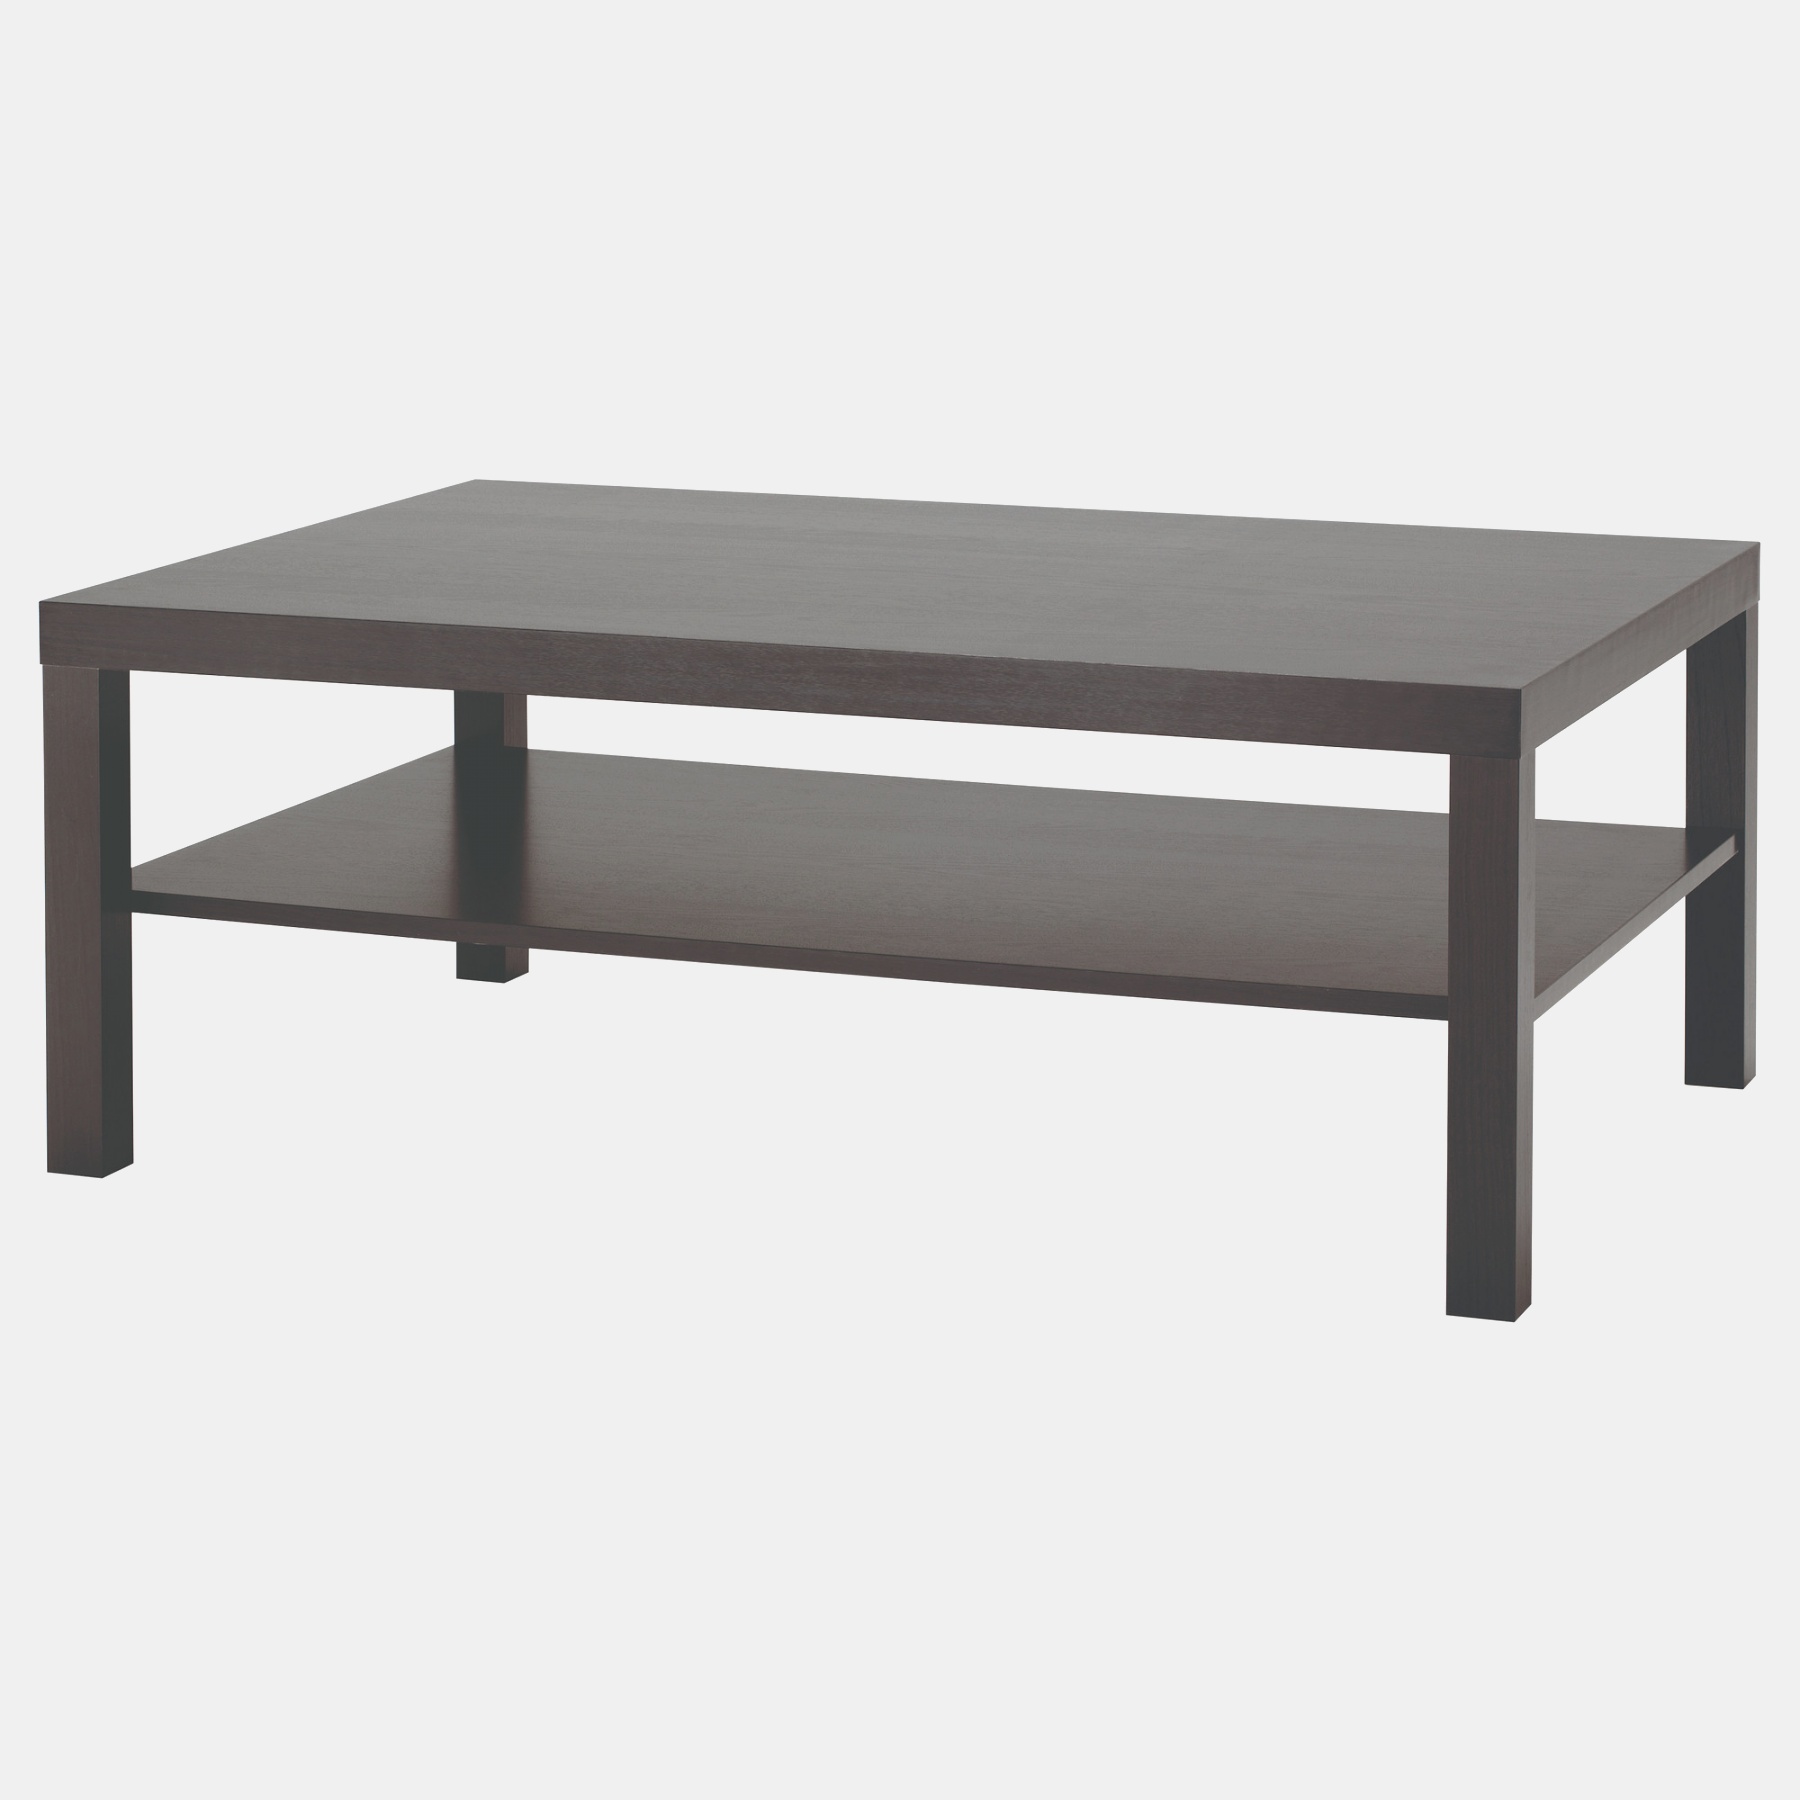 low table | LACK Coffee table Black-brown 118x78 cm - IKEA | low table